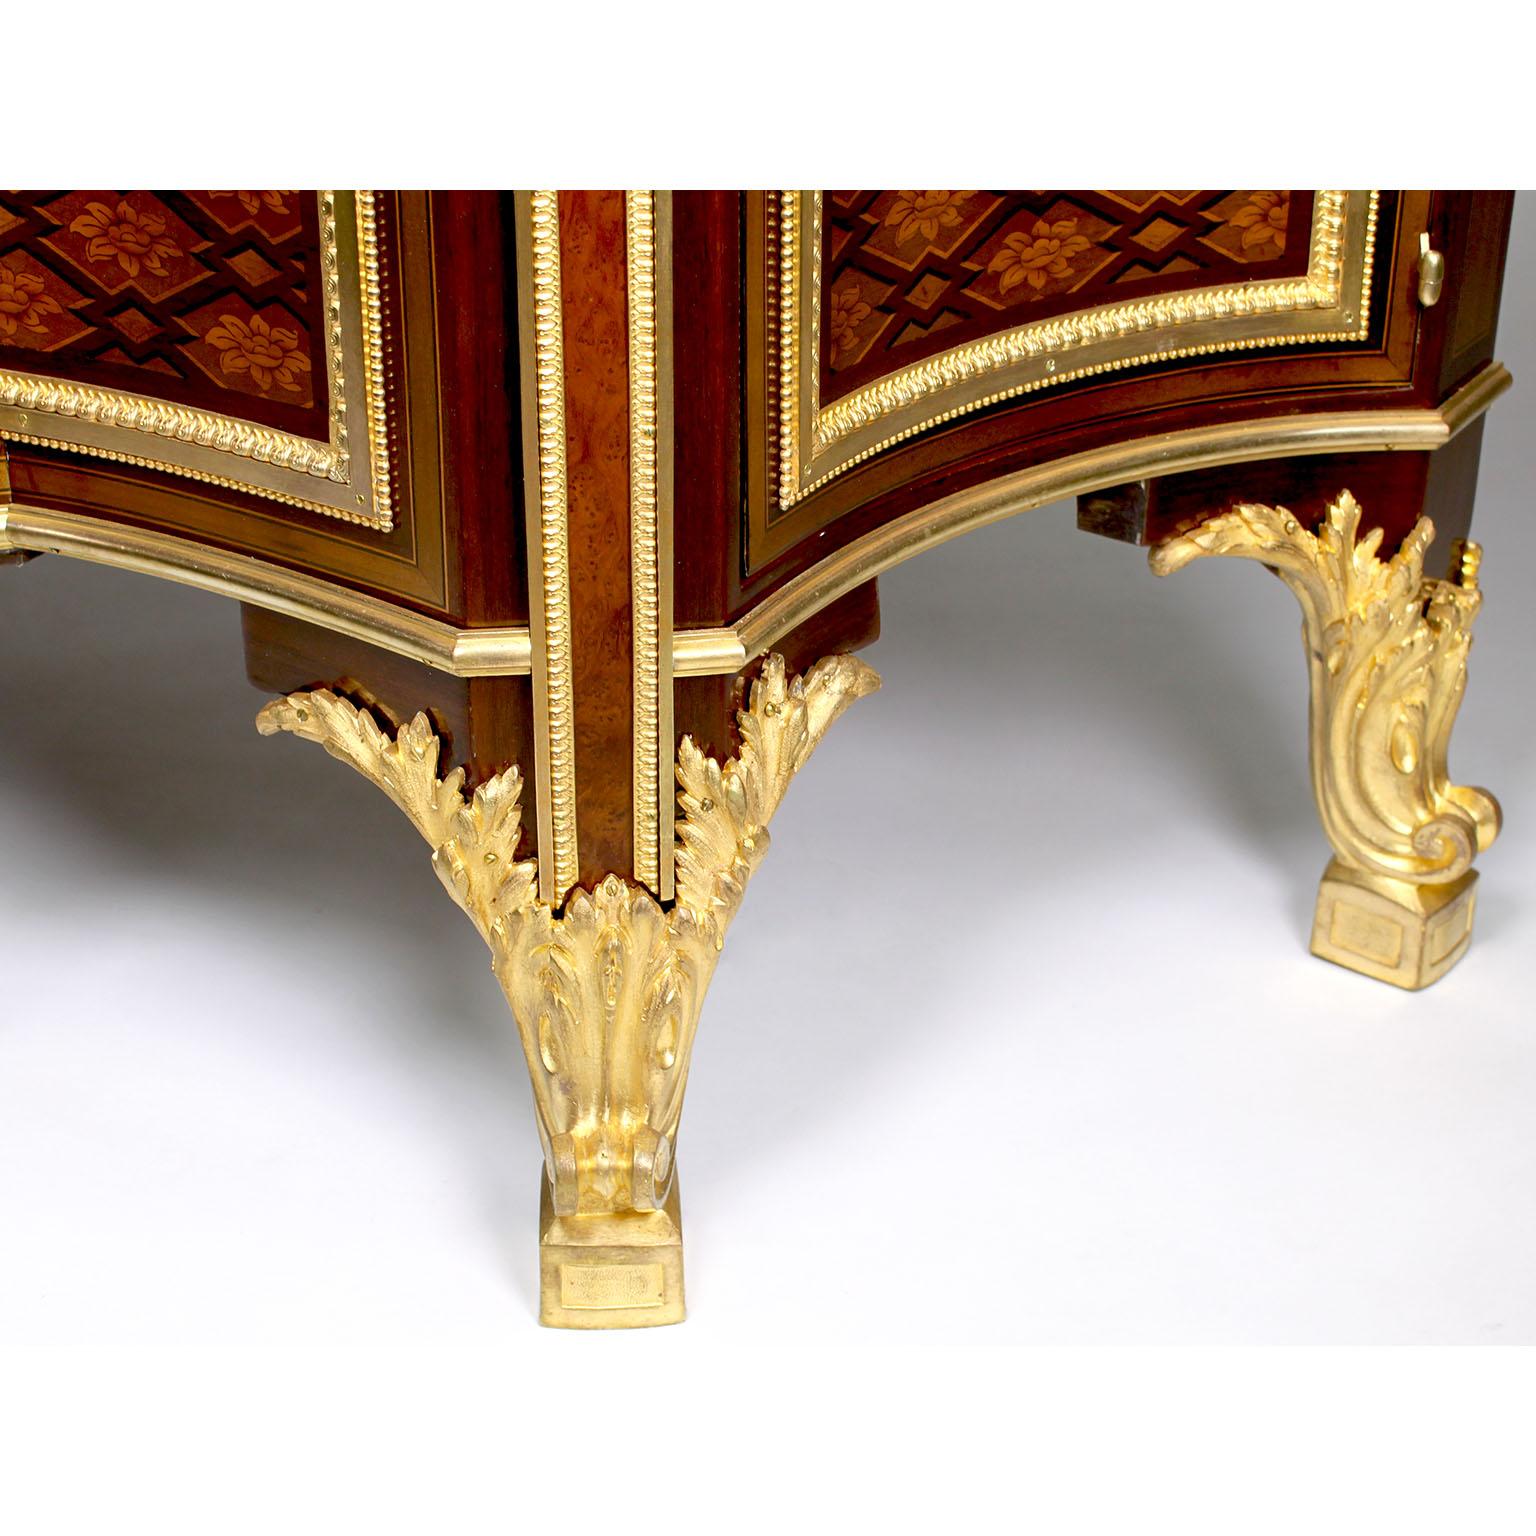 French 19th Century Louis XV-XVI Ormolu Mounted Marquetry Commode Marble Top For Sale 9